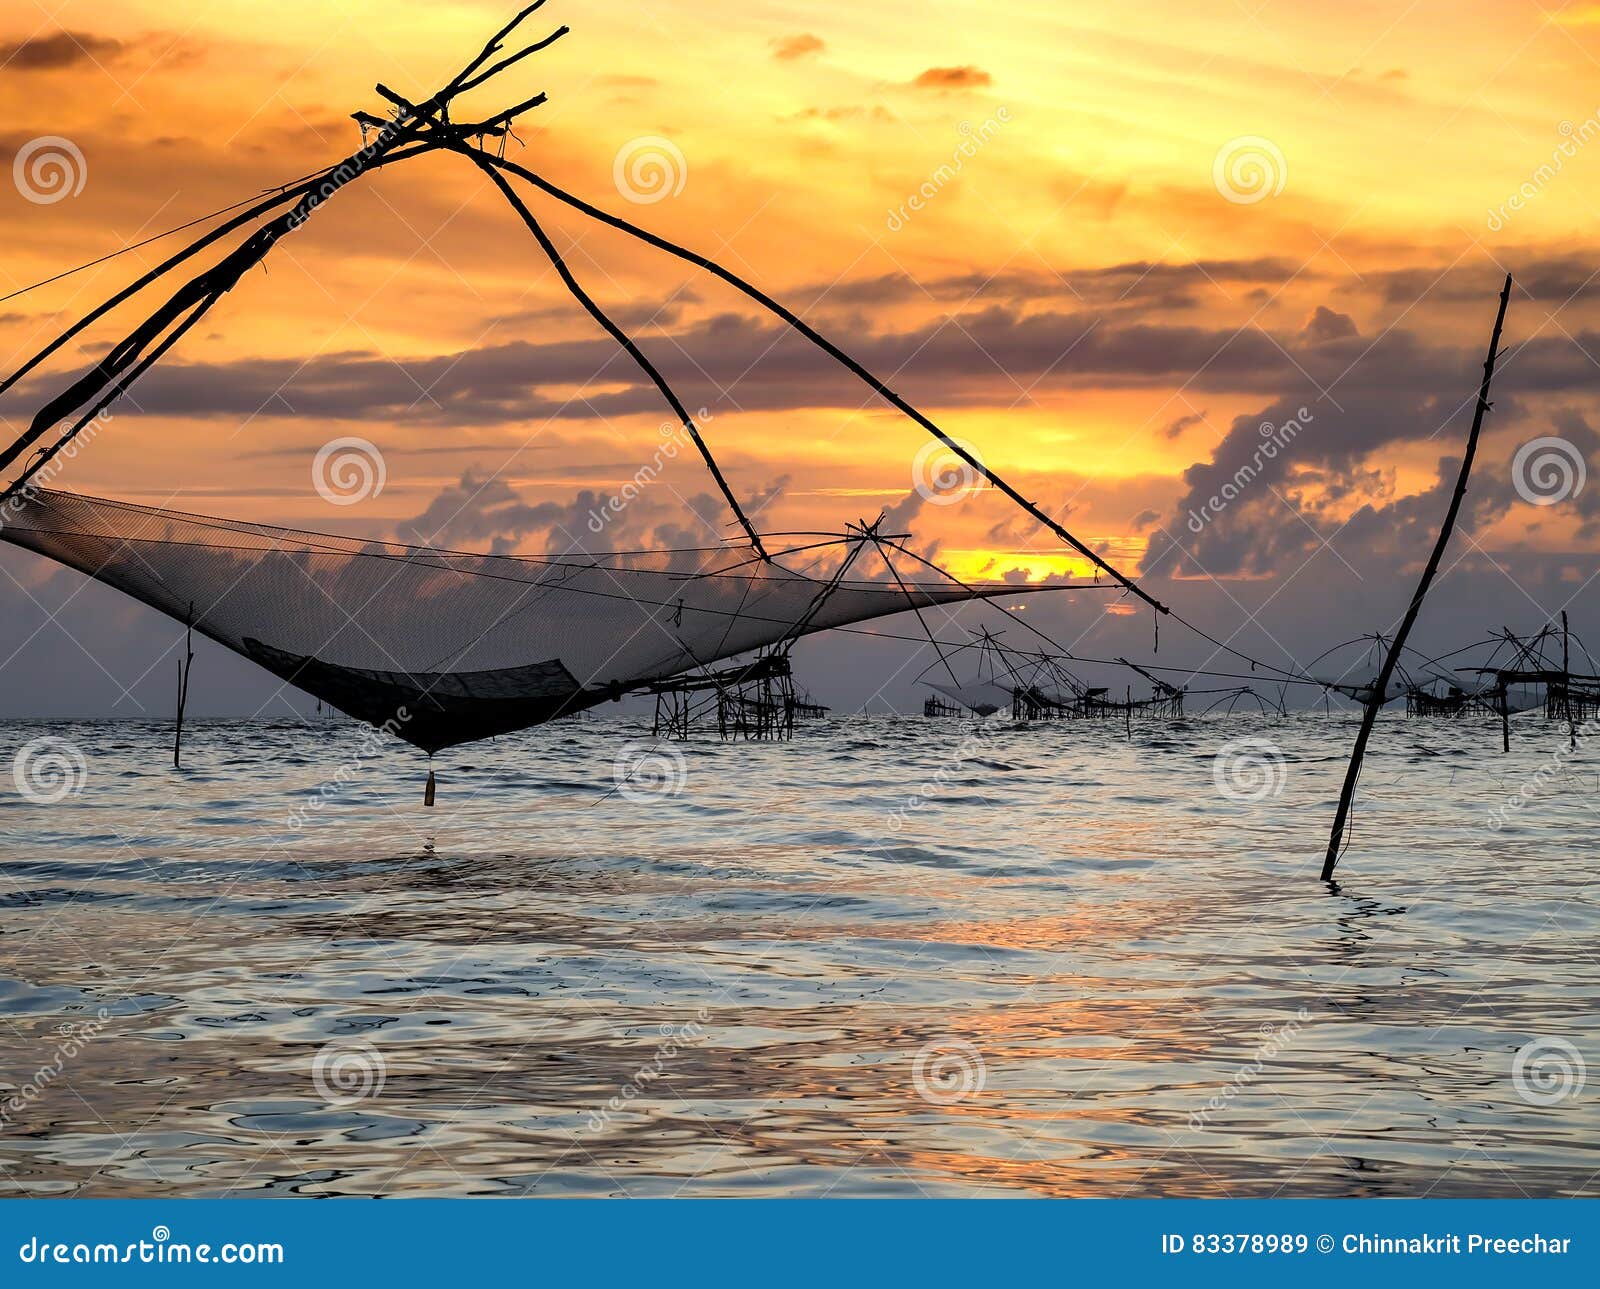 Silhouette of Traditional Fishing Method Using a Bamboo Square Dip Net with  Sunrise Sky Background Stock Image - Image of outdoor, season: 83378989